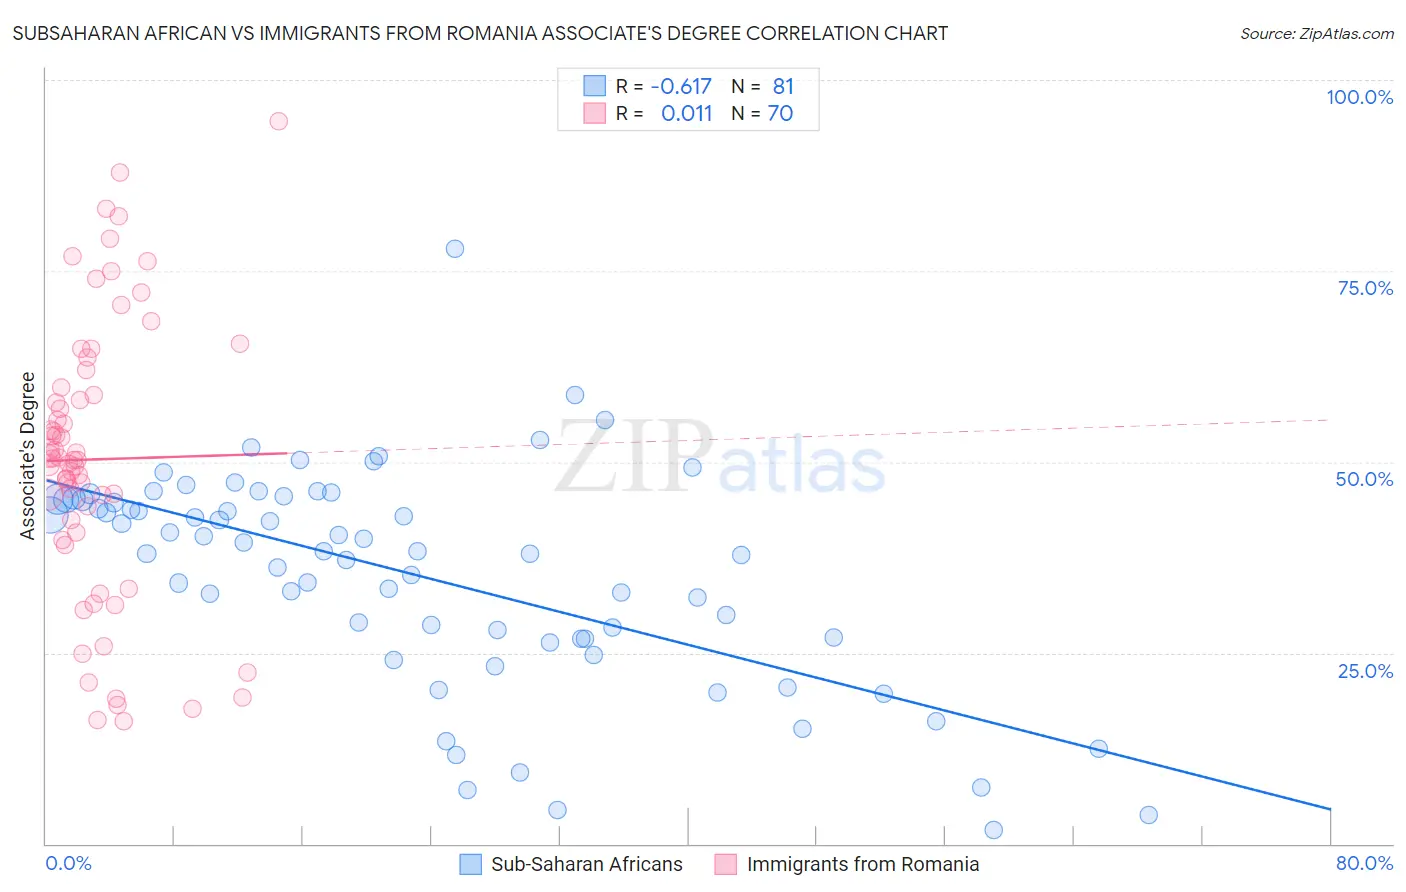 Subsaharan African vs Immigrants from Romania Associate's Degree